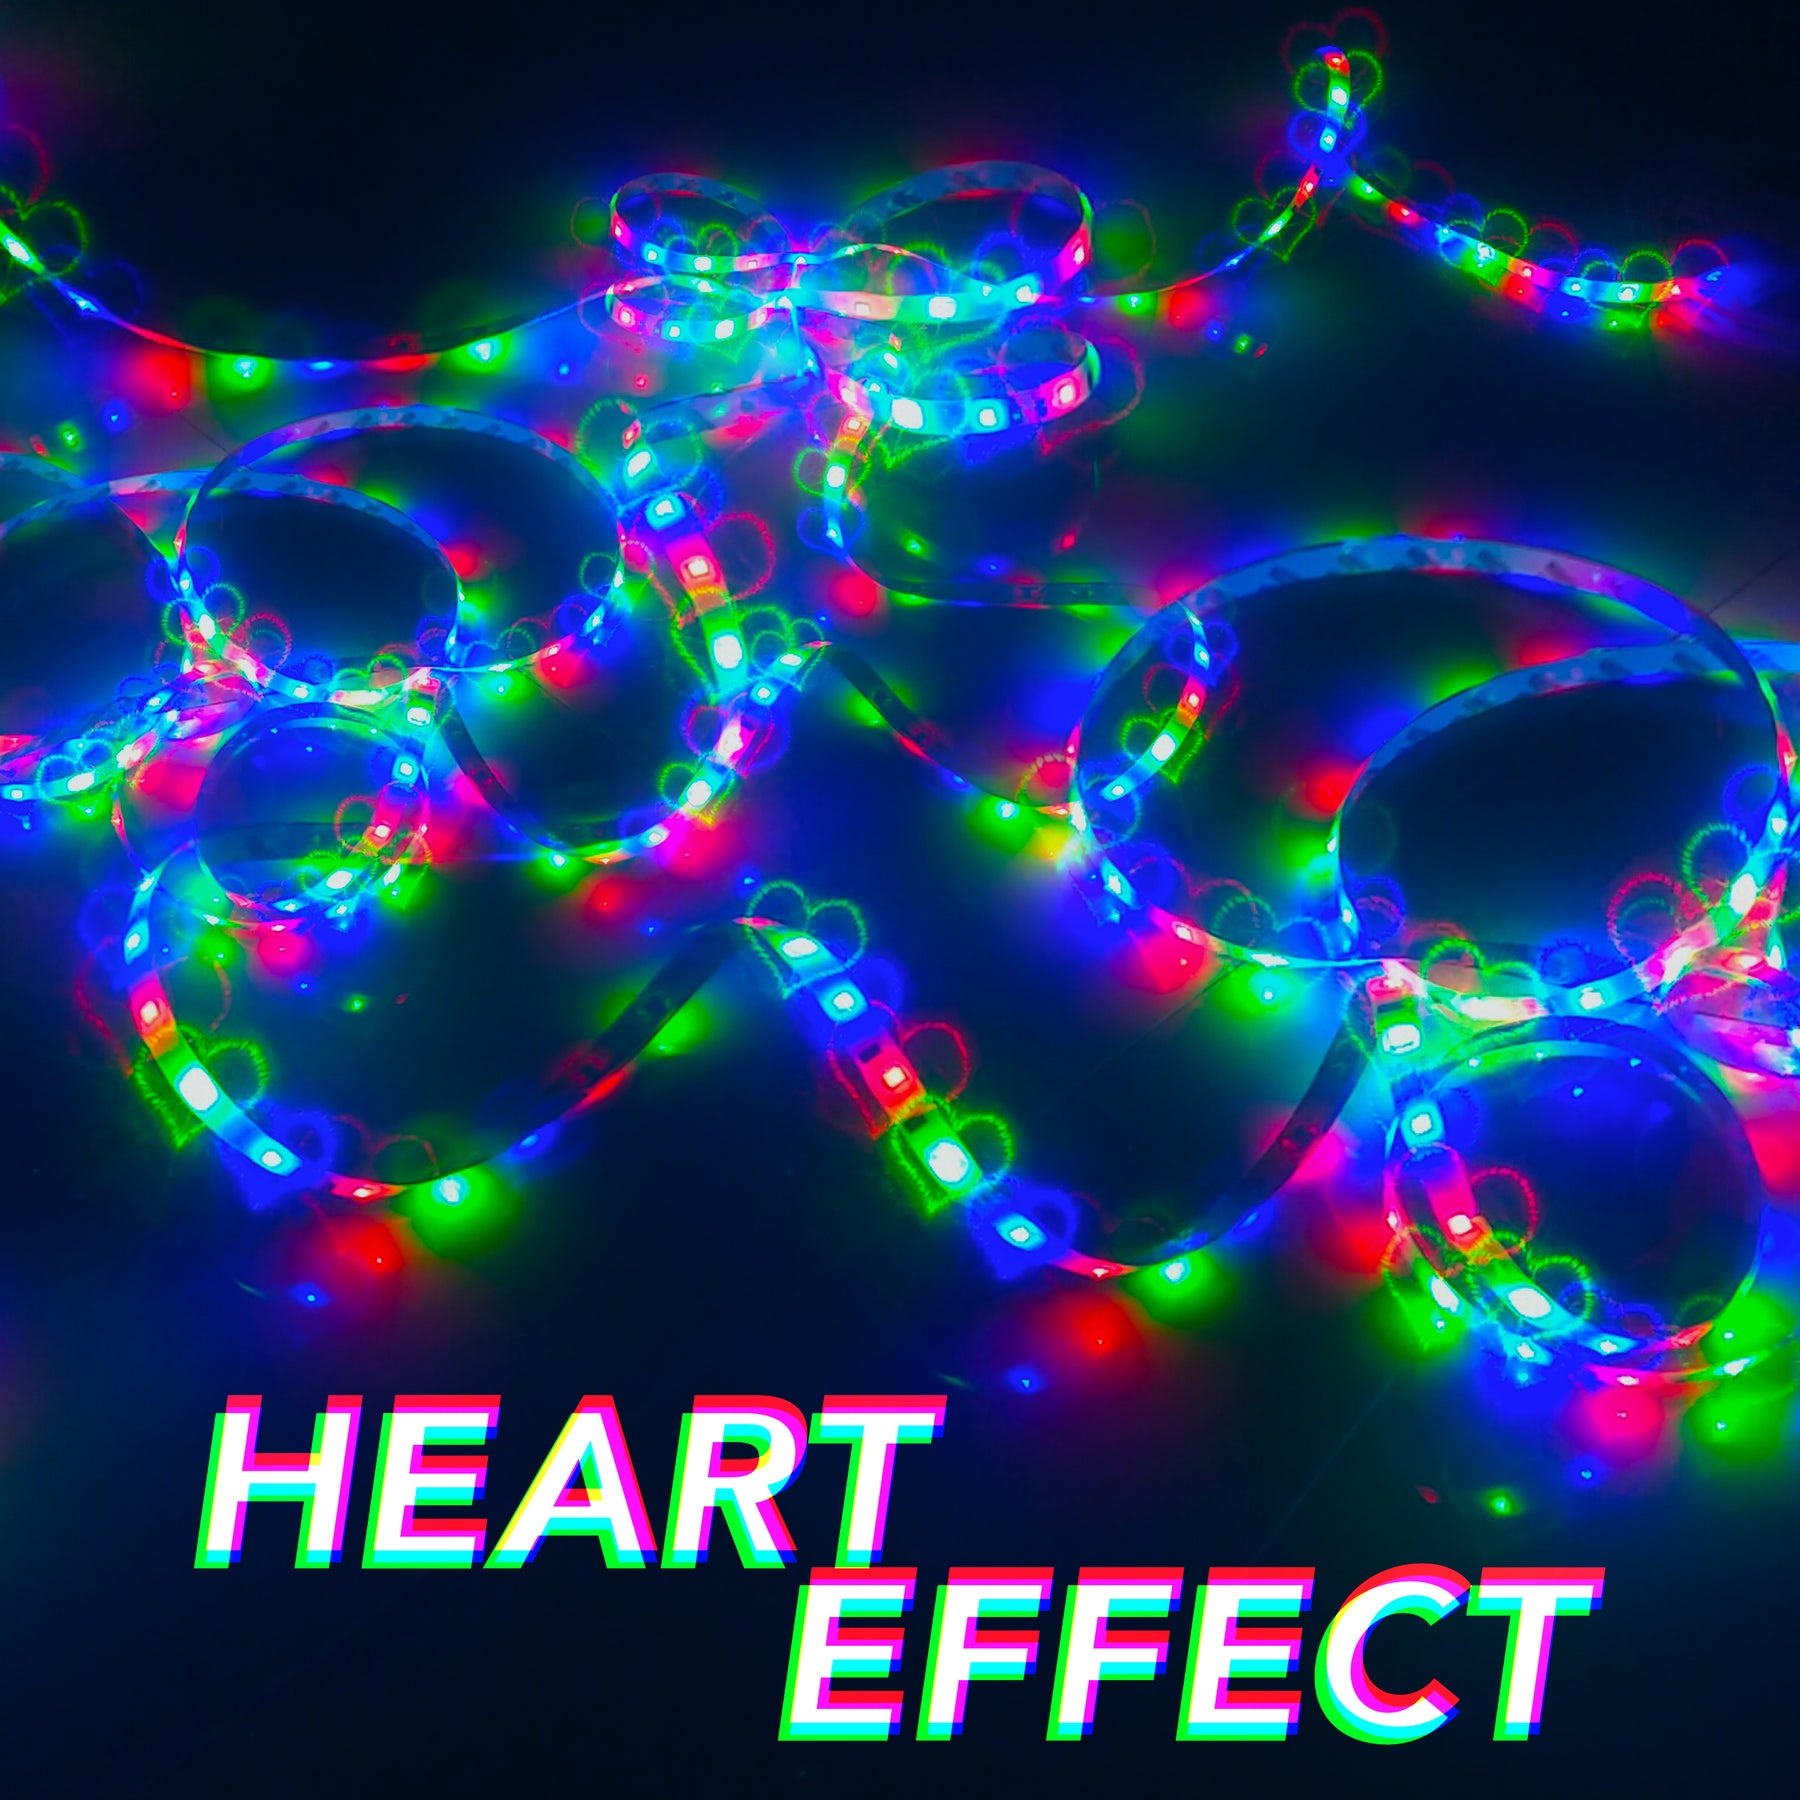 Diffraction Glasses - Heart Effect Refraction Glasses I Special Effects Show You Hearts for Raves, Music Festivals & More